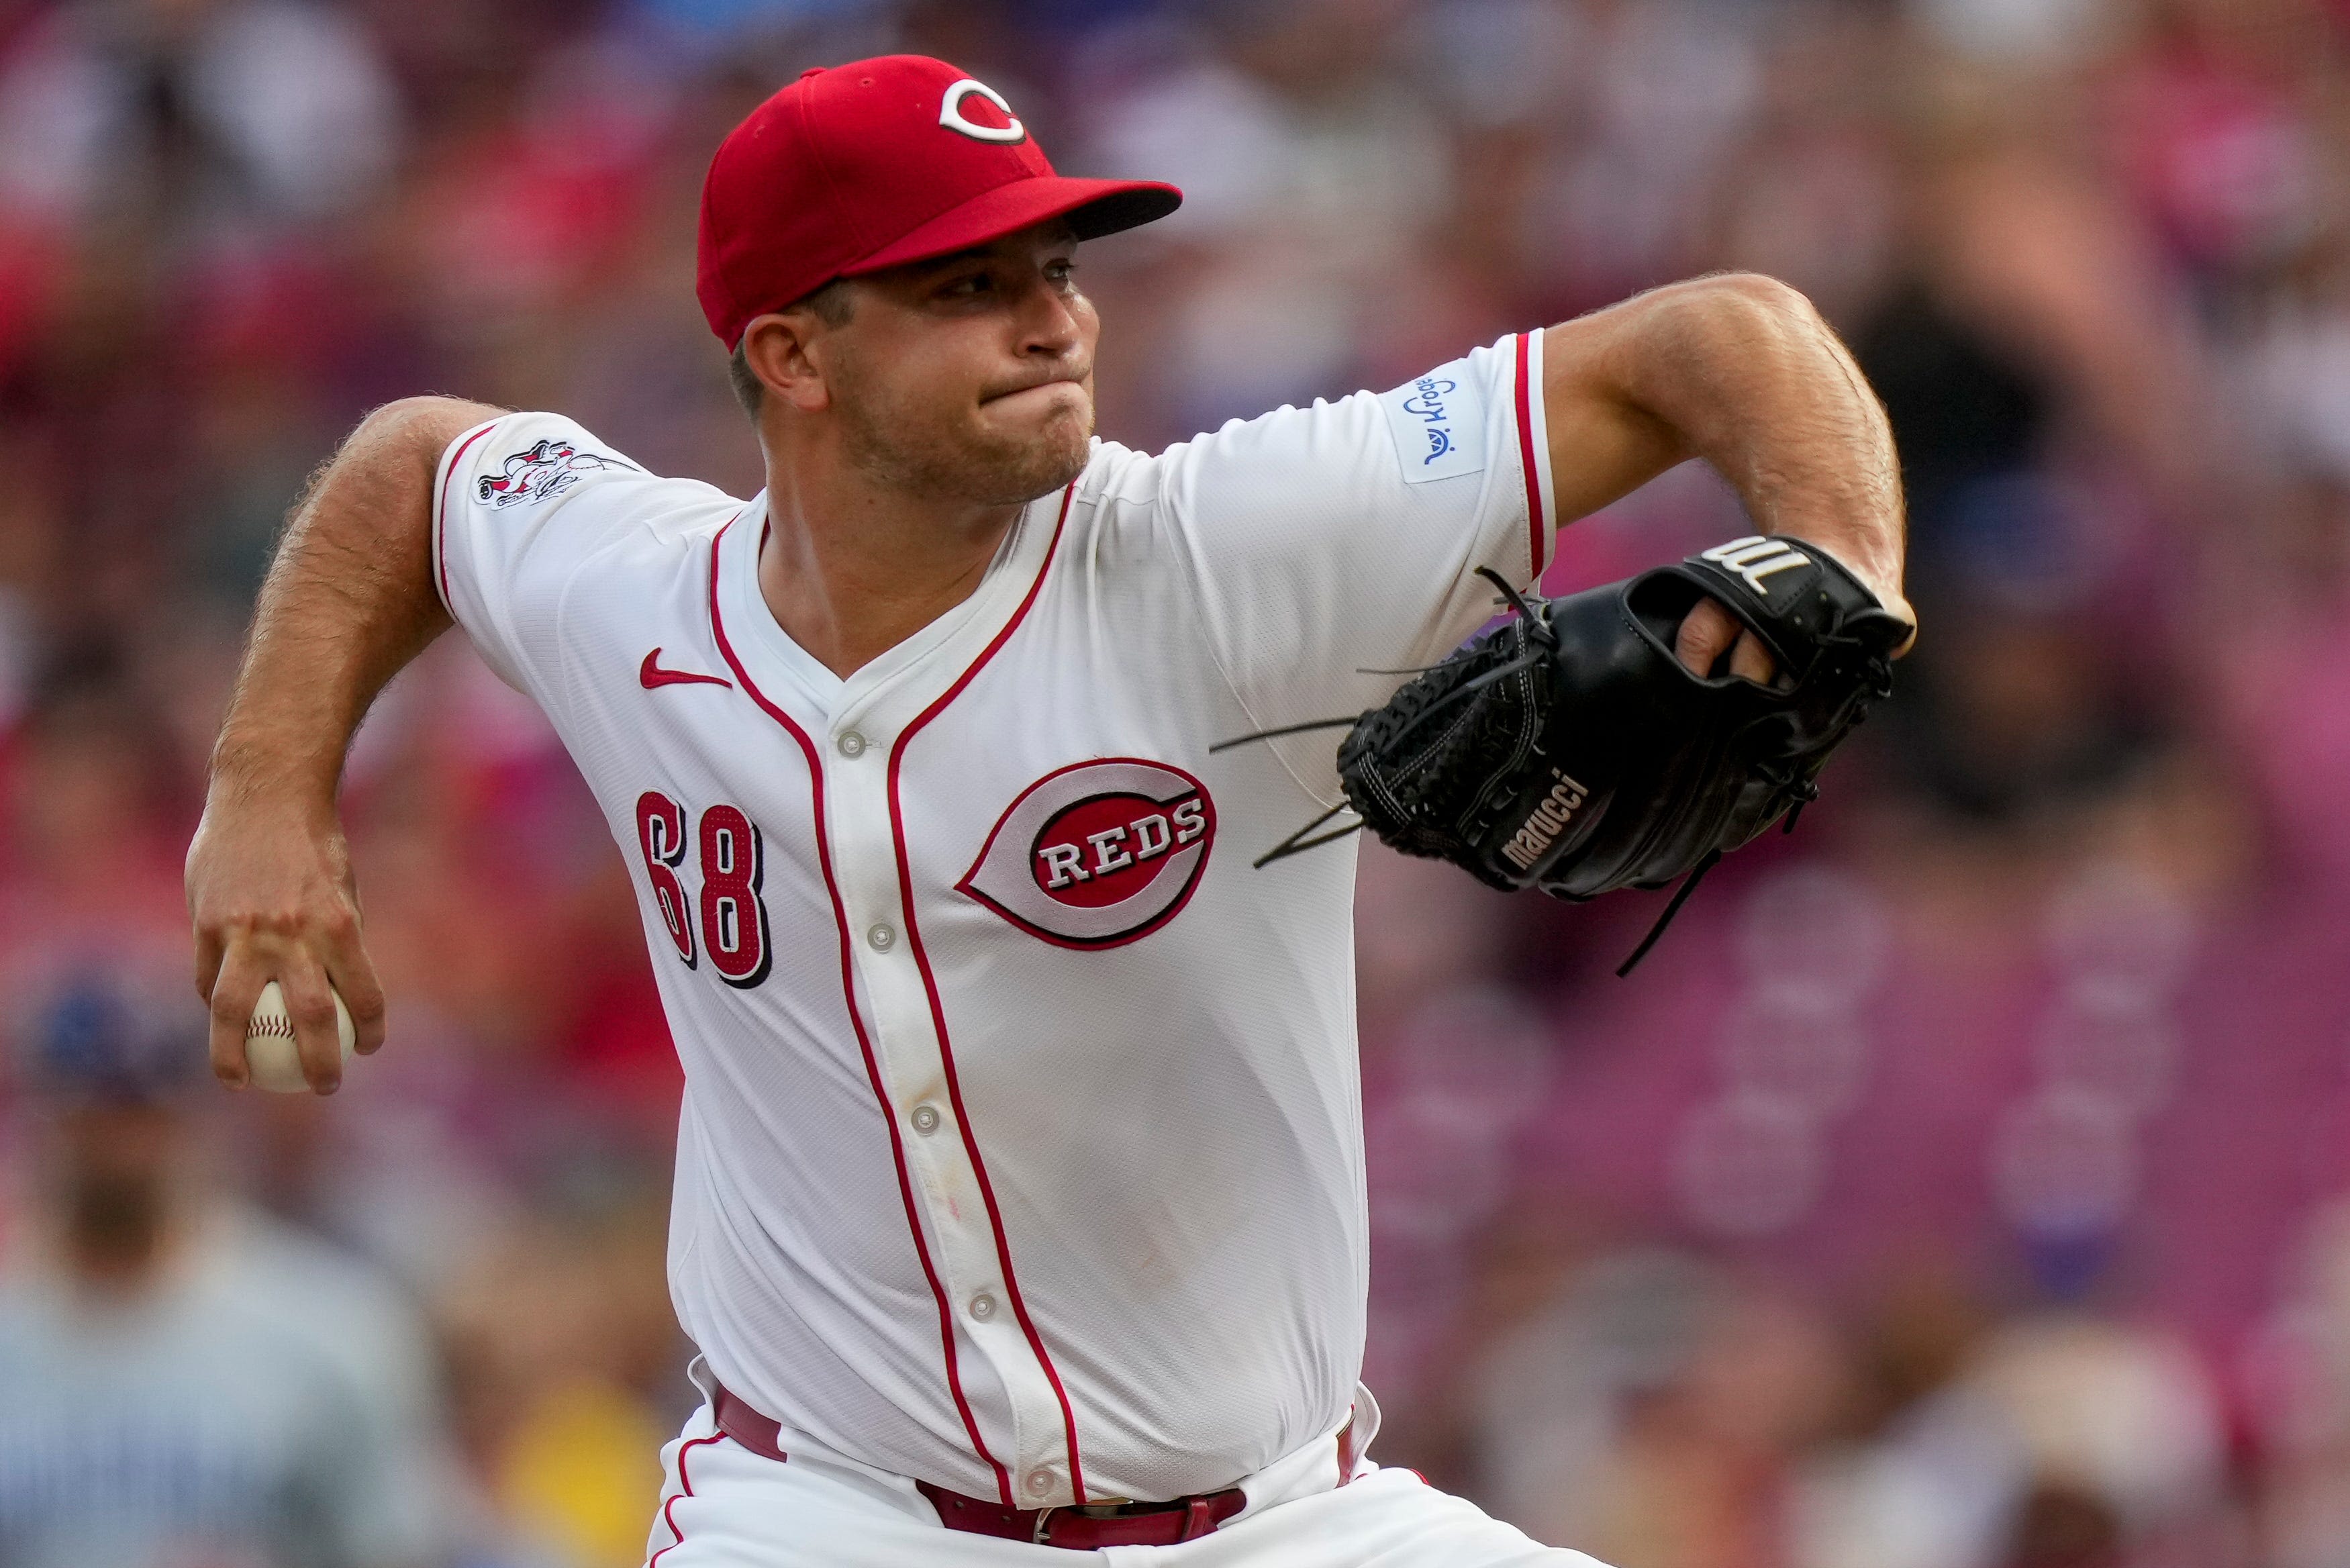 Spiers, Benson and Friedl lead the Reds to a series-opening win over the Cubs